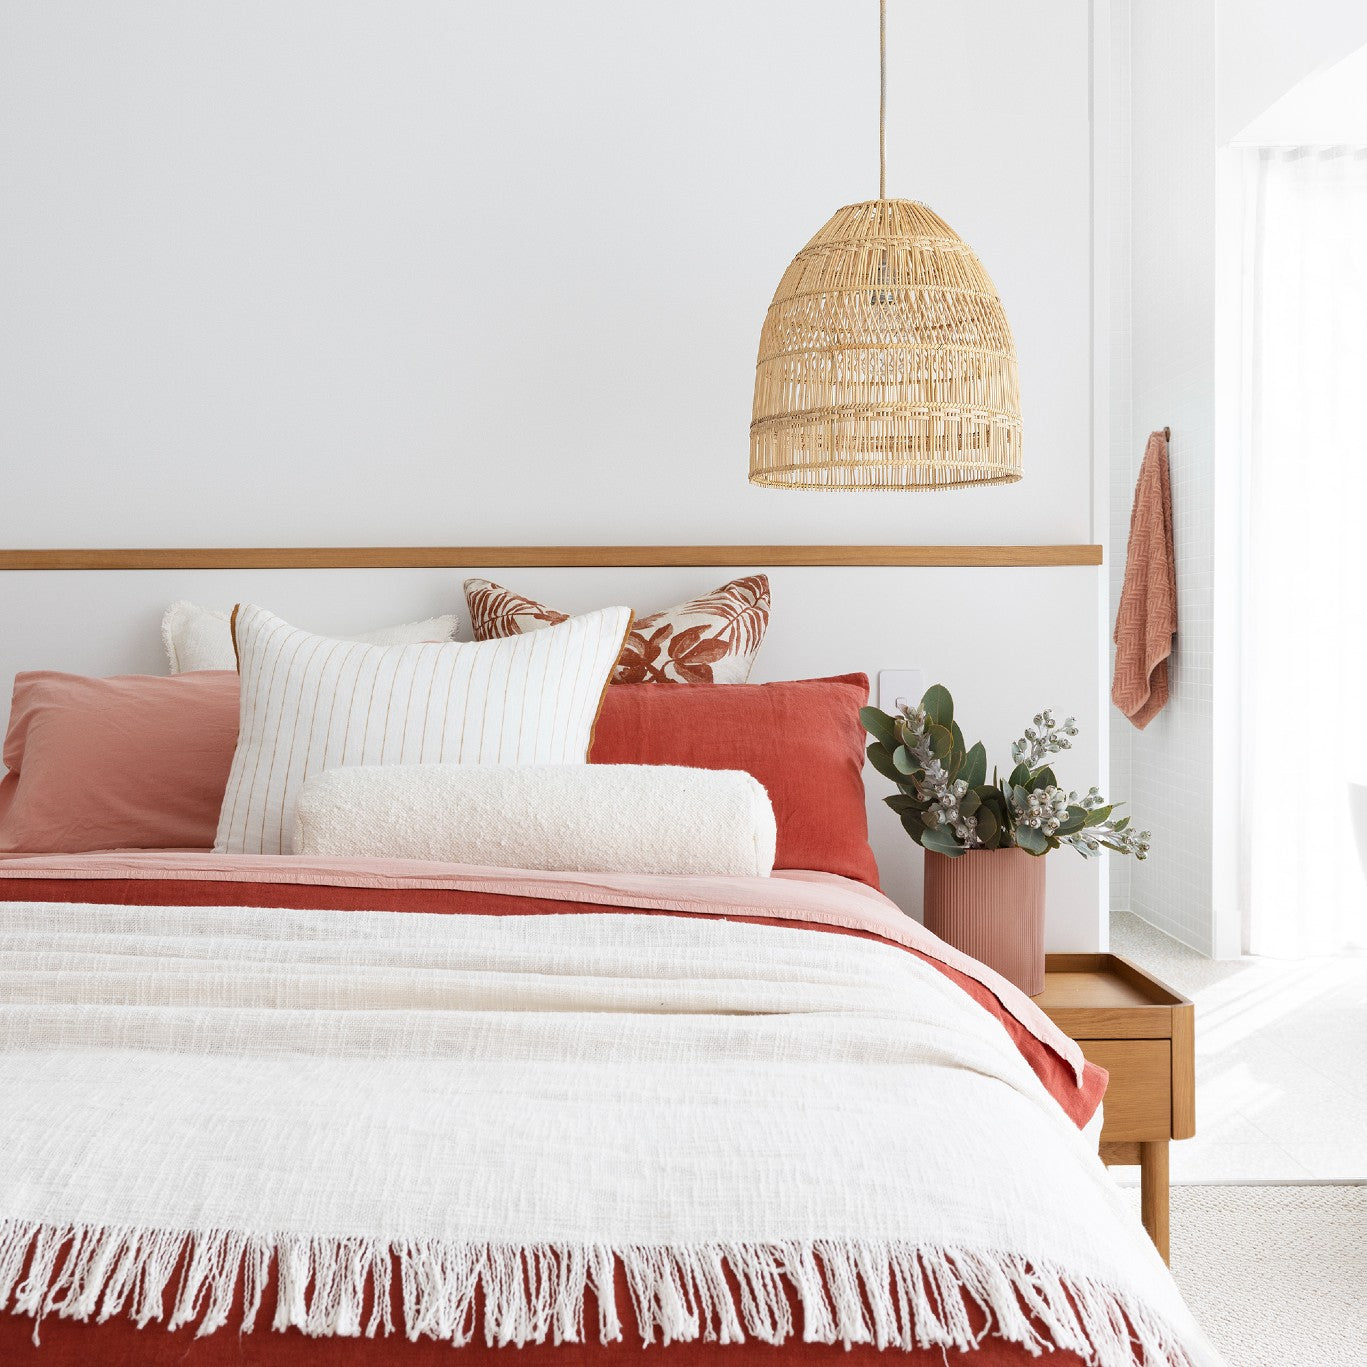 Rattan coastal pendant light. hanging above a bed dressed with dusty pink and rusty red bed linen with a cream throw.